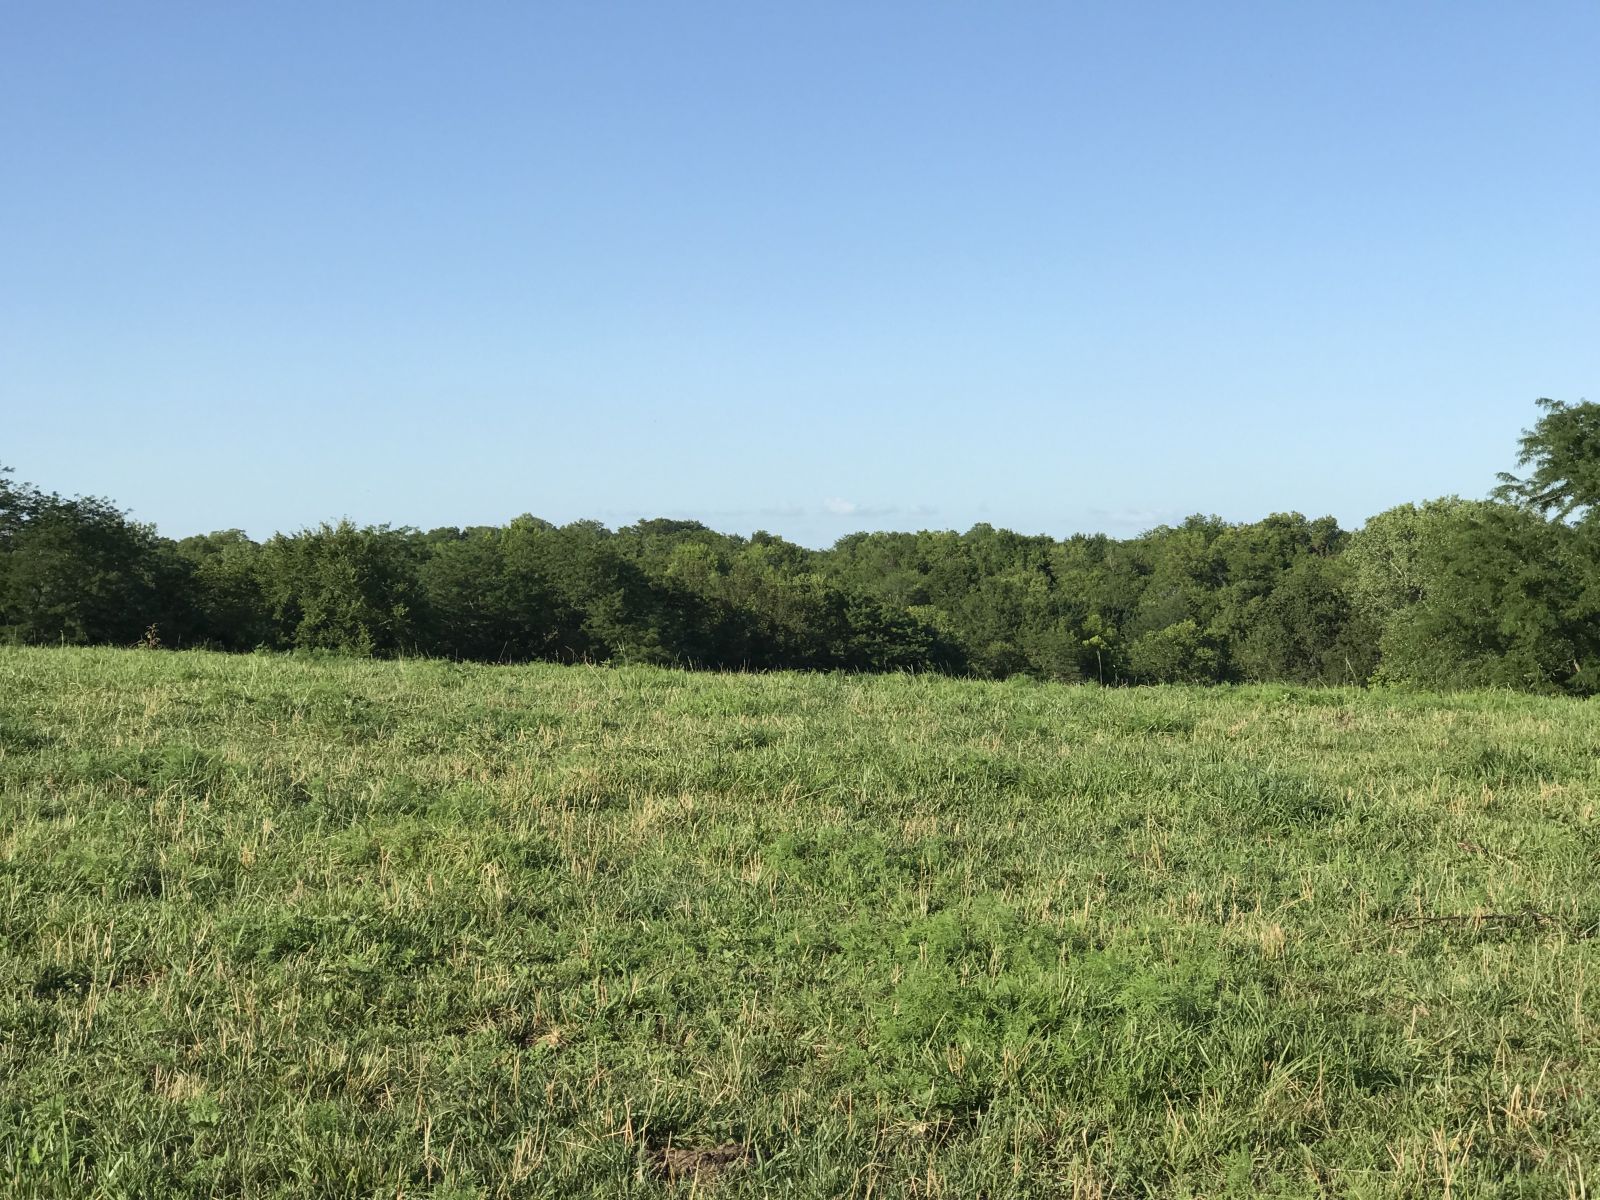 HENRY COUNTY LAND AUCTION   49+/- ACRES